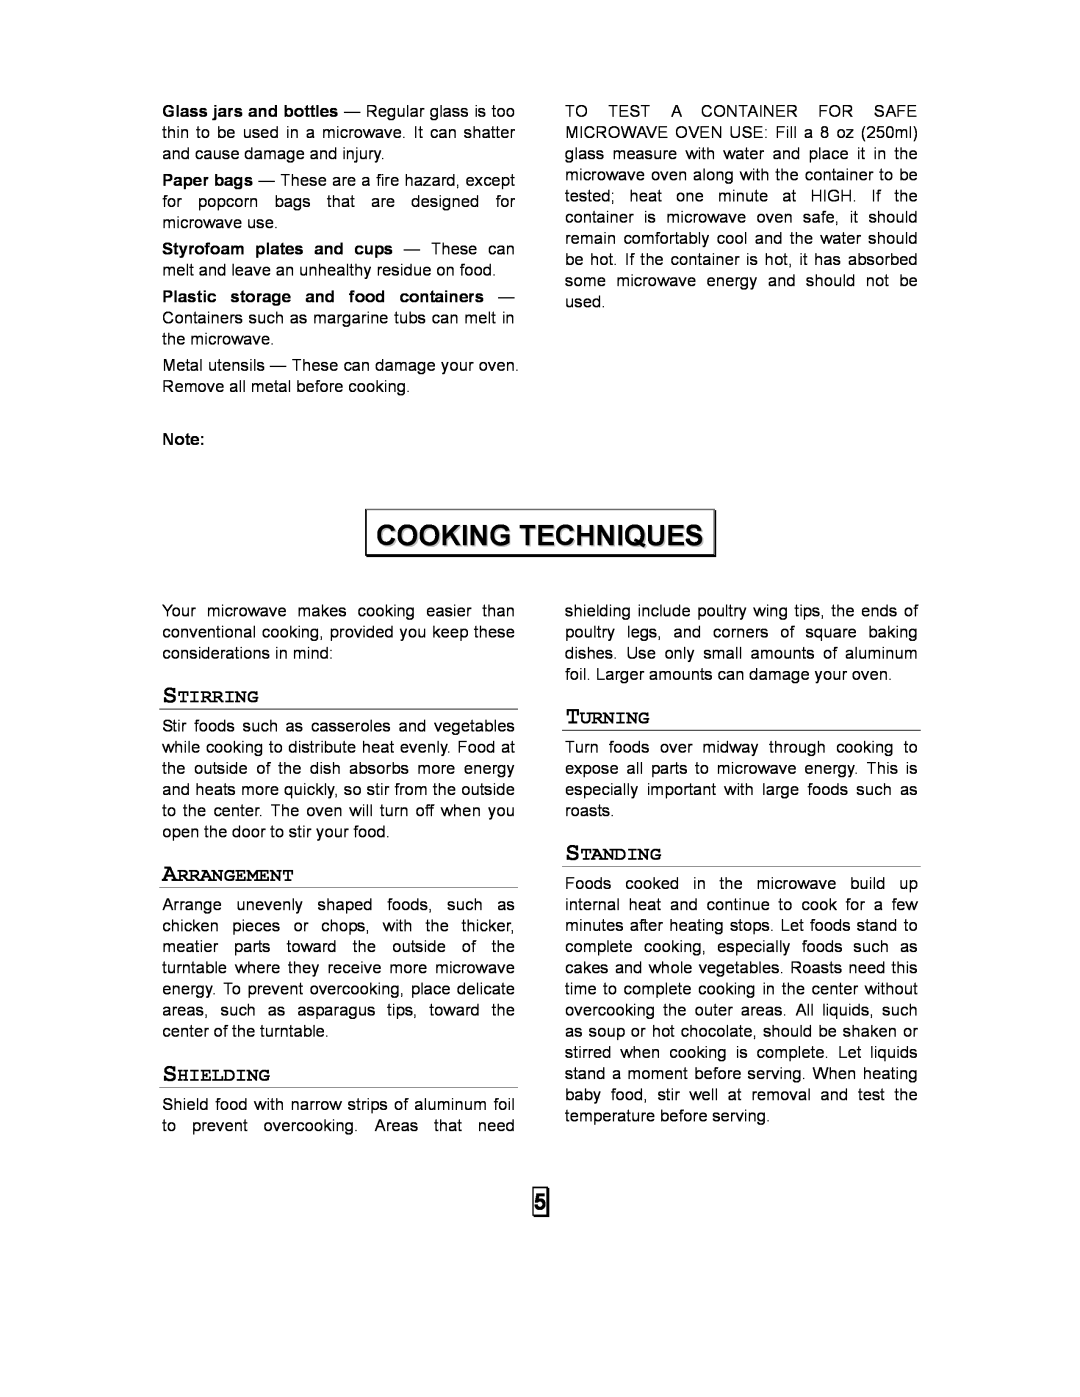 Galaxy Metal Gear 87040 user manual Cooking Techniques, Stirring, Arrangement, Shielding, Turning, Standing 